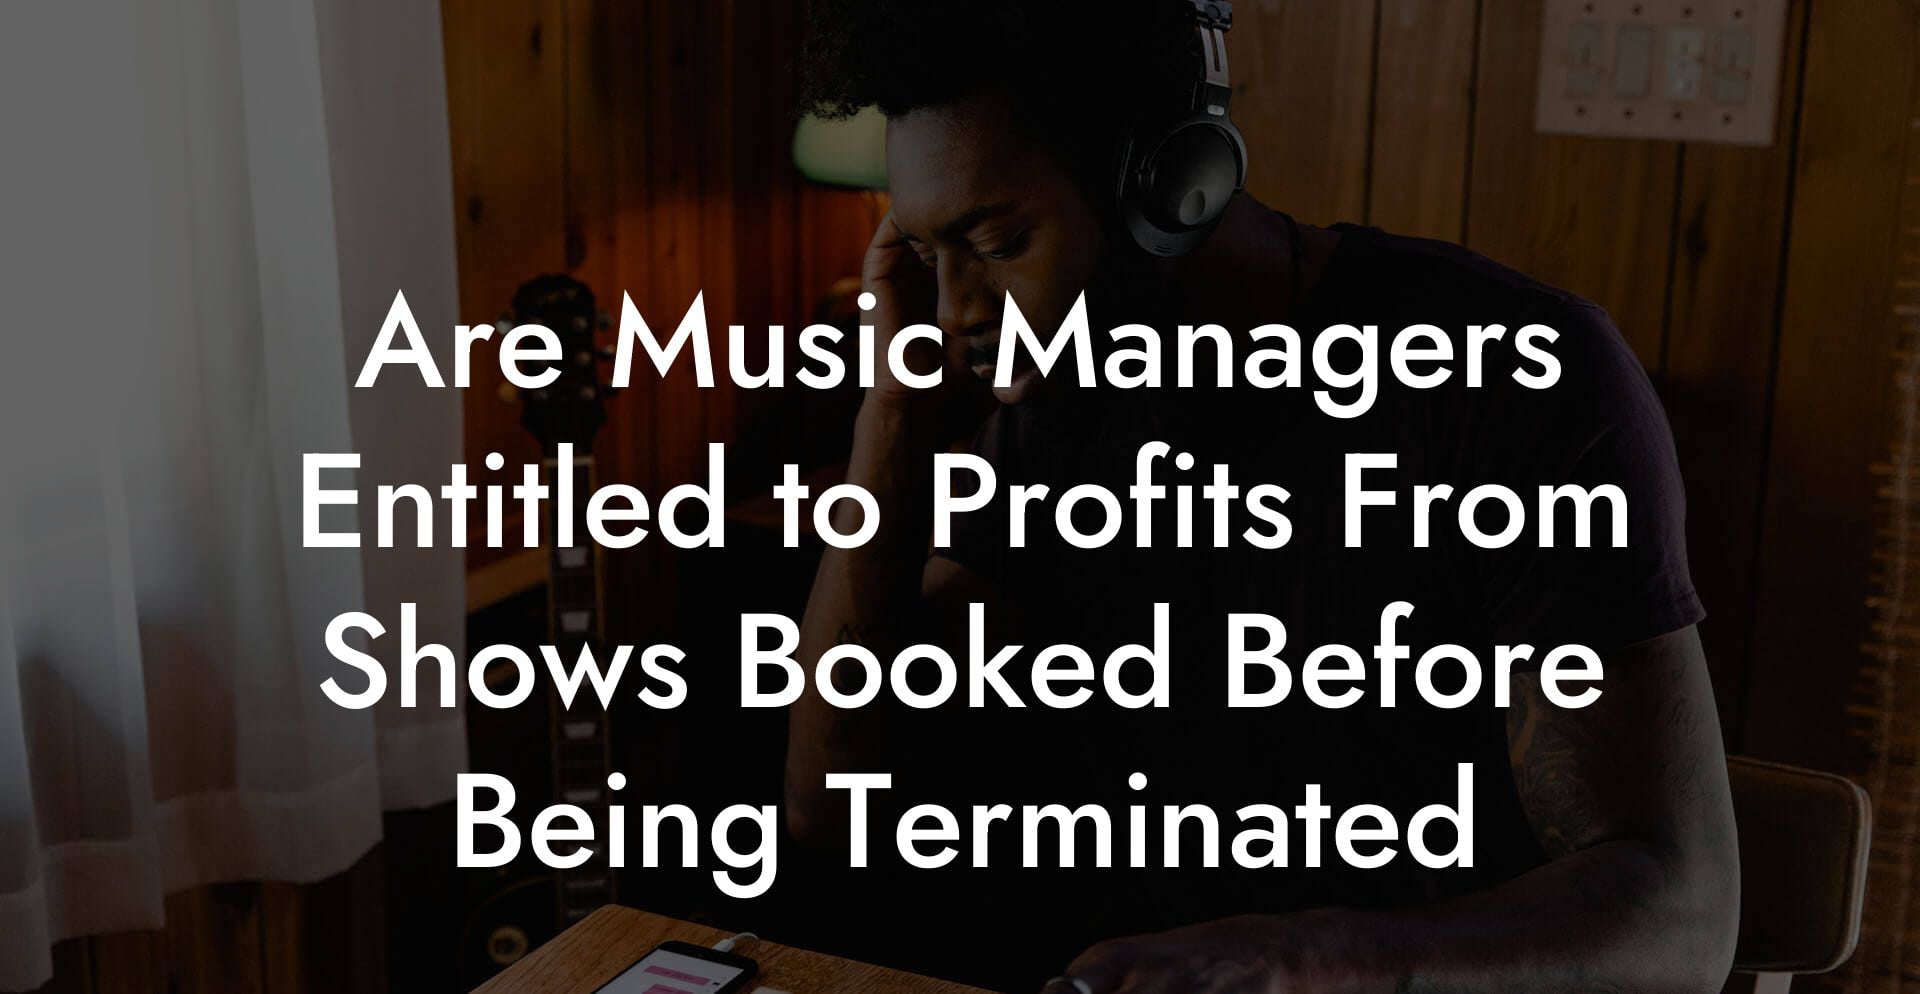 Are Music Managers Entitled to Profits From Shows Booked Before Being Terminated